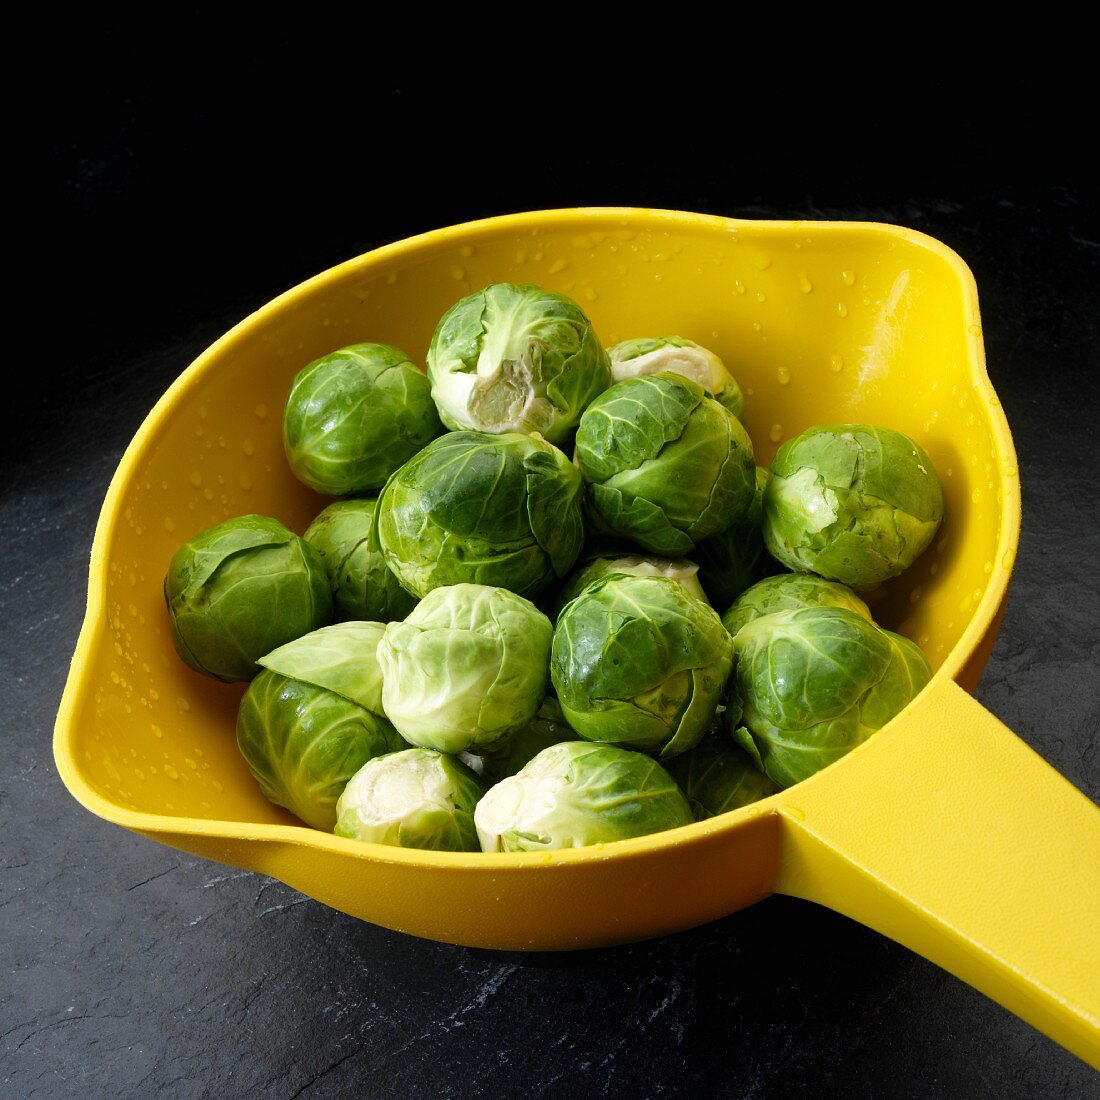 Brussels sprouts in yellow colander